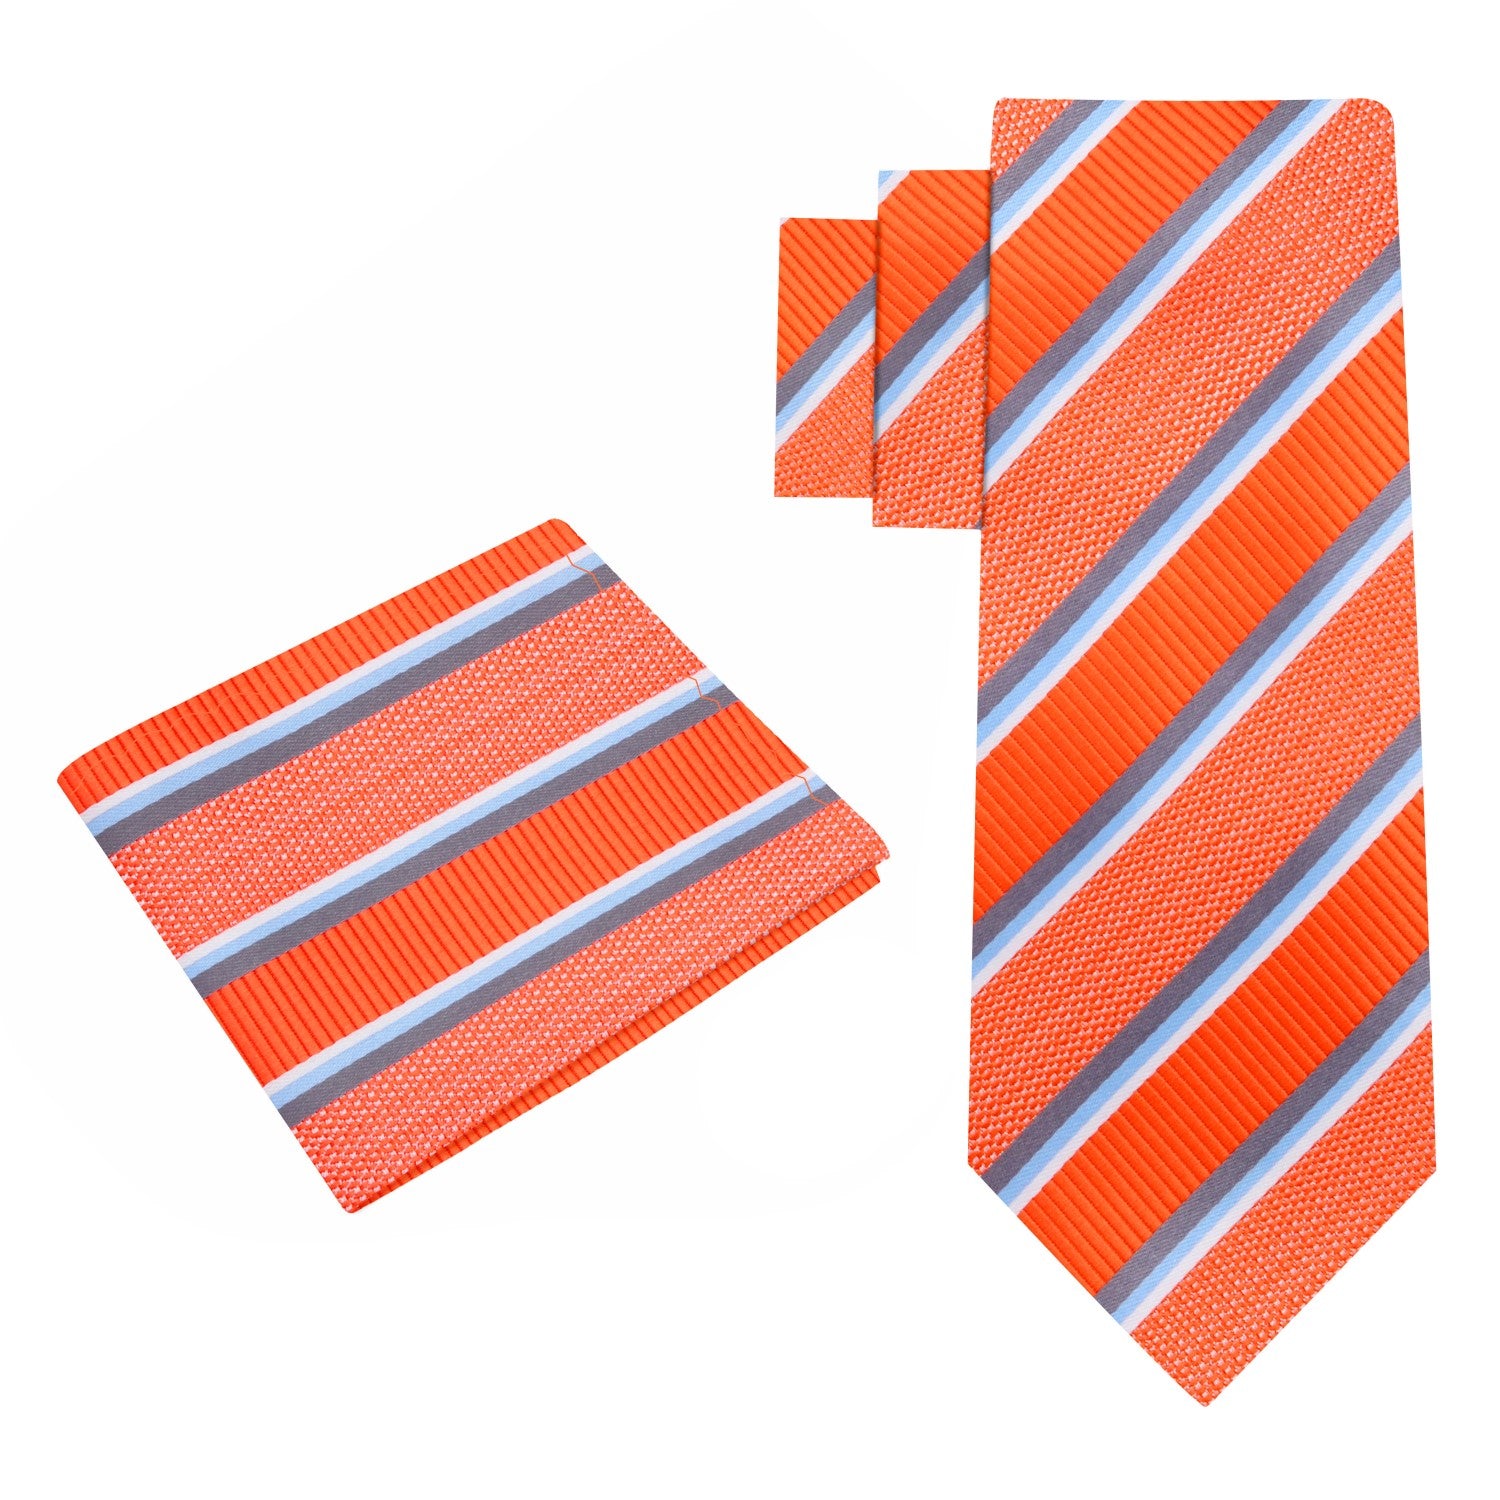 View 2: Orange and Grey Stripe Tie and Pocket Square